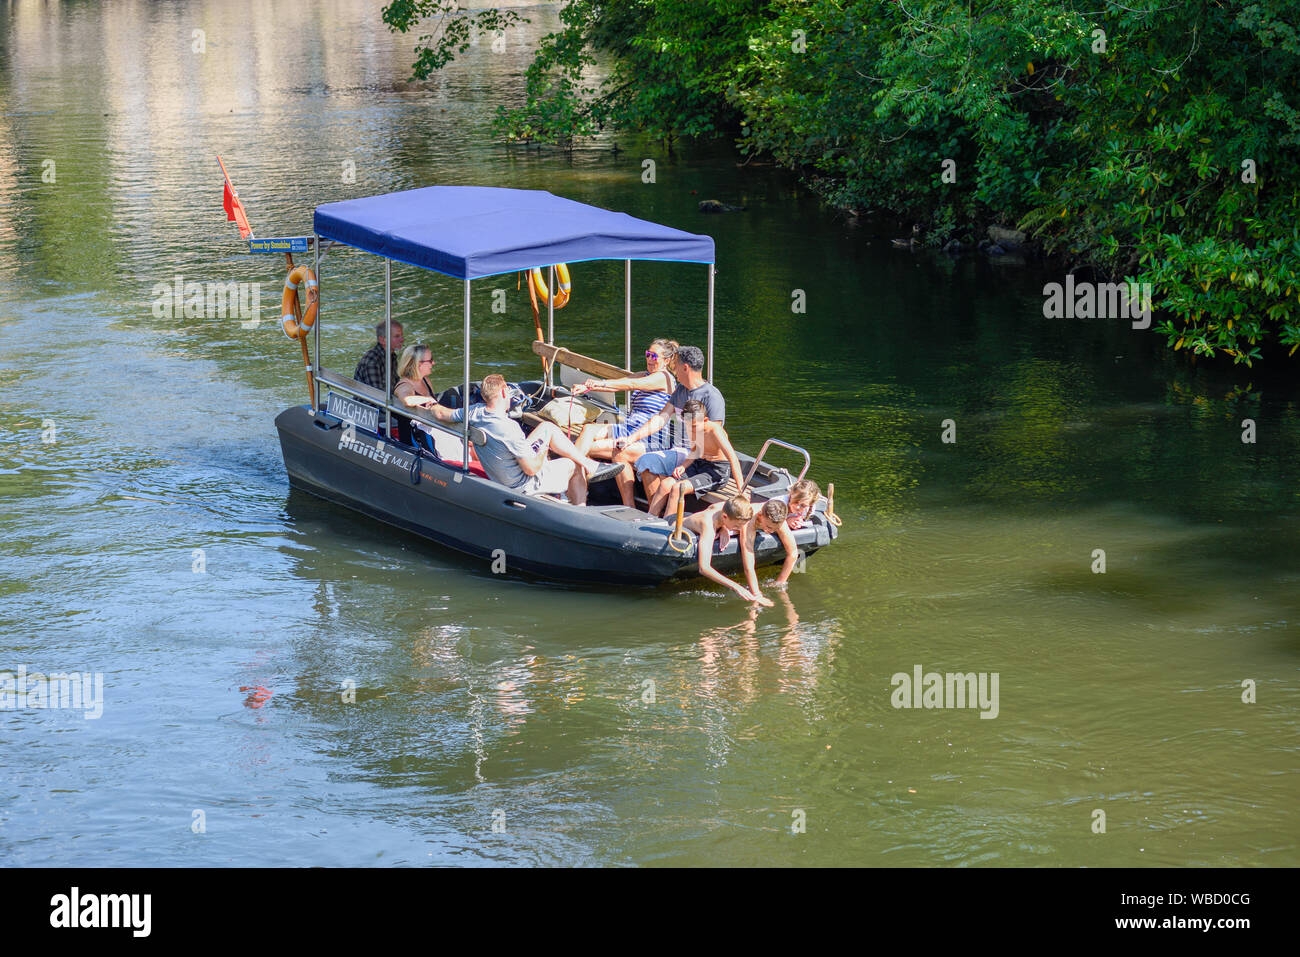 Matlock Bath, Derbyshire, UK: August 26th 2019. Heatwave Temperature sore in the high twenties on Bank holiday Monday. People enjoy an ice cream along the promenade and a boat trip down the River Derwent. Credit: Ian Francis/Alamy Live News Stock Photo